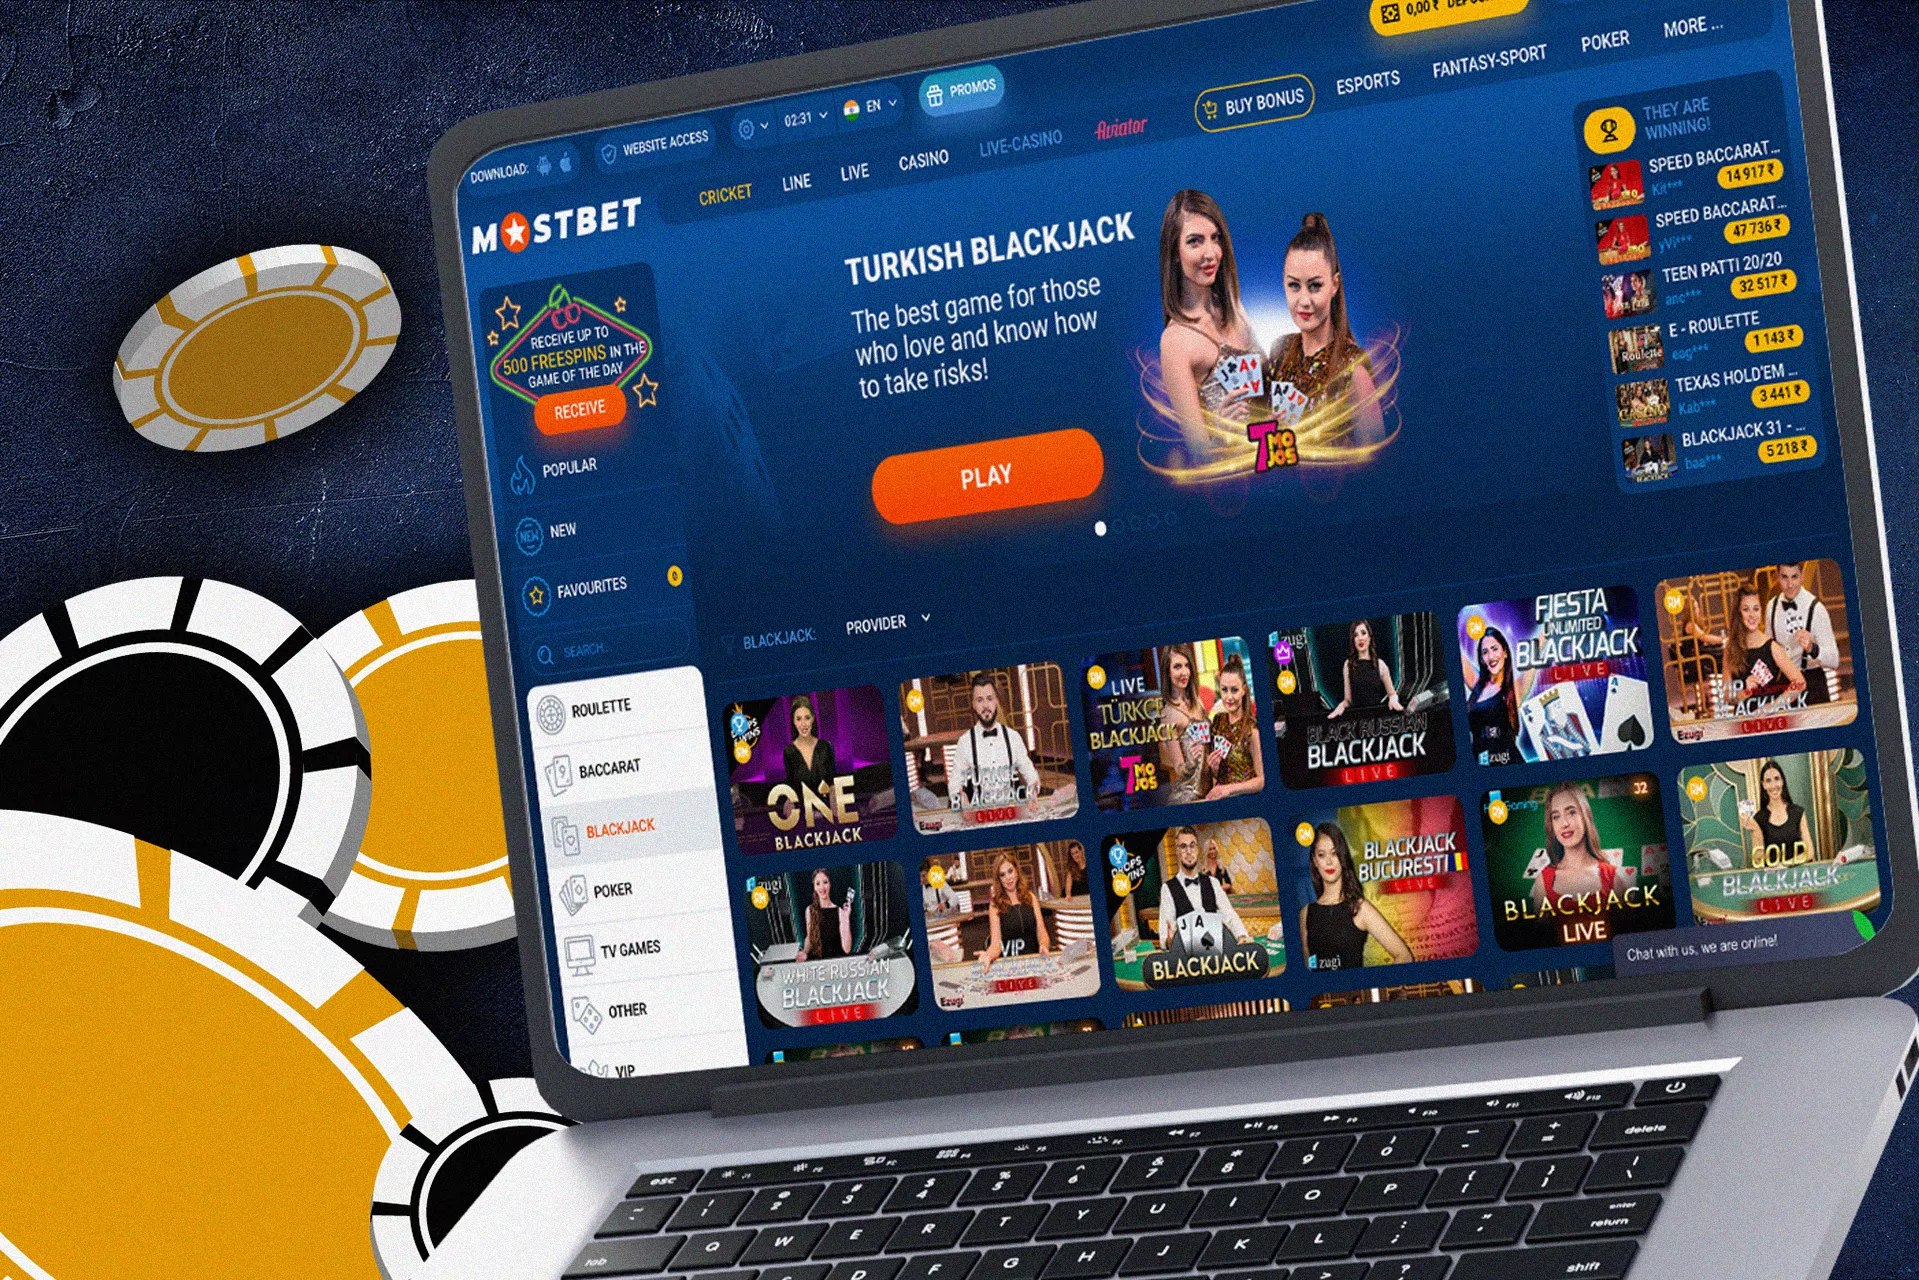 Play blackgack with other players at the Mostbet casino.